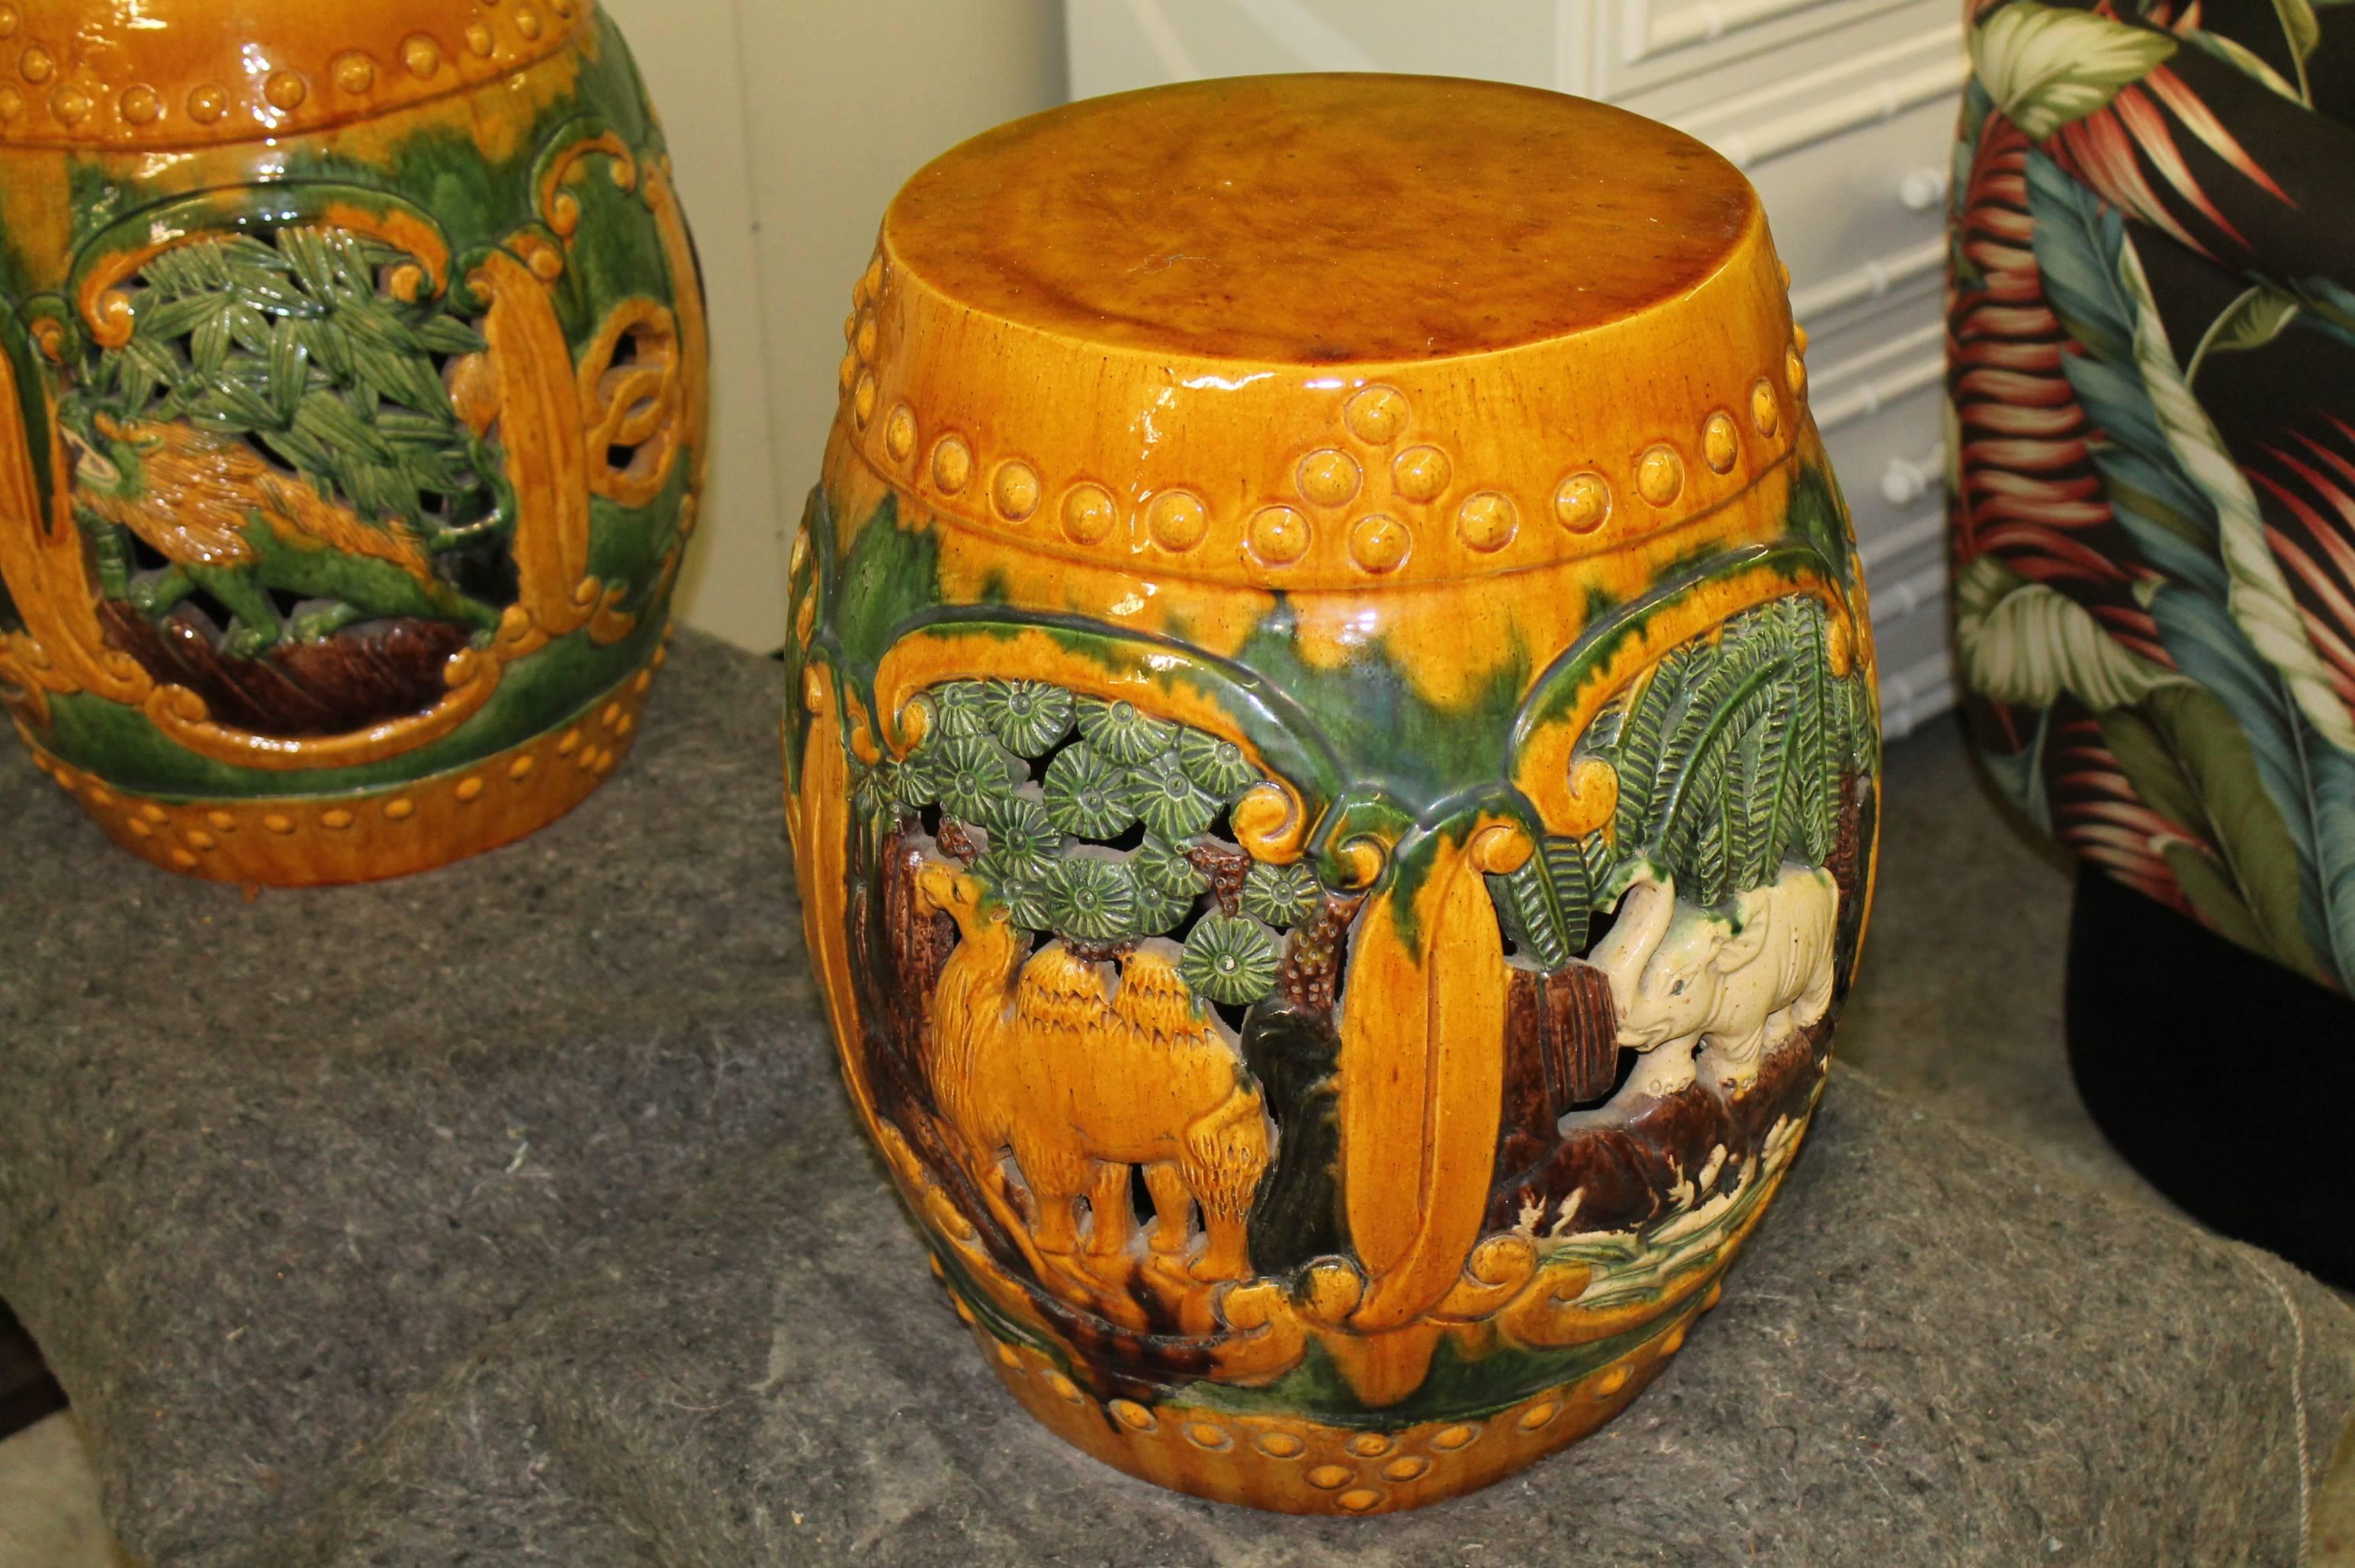 Lovely pair of ceramic drum garden stools with a safari animal motif including camels, elephants, palm trees, etc. These are very heavy and sturdy with no chips or breaks. 
